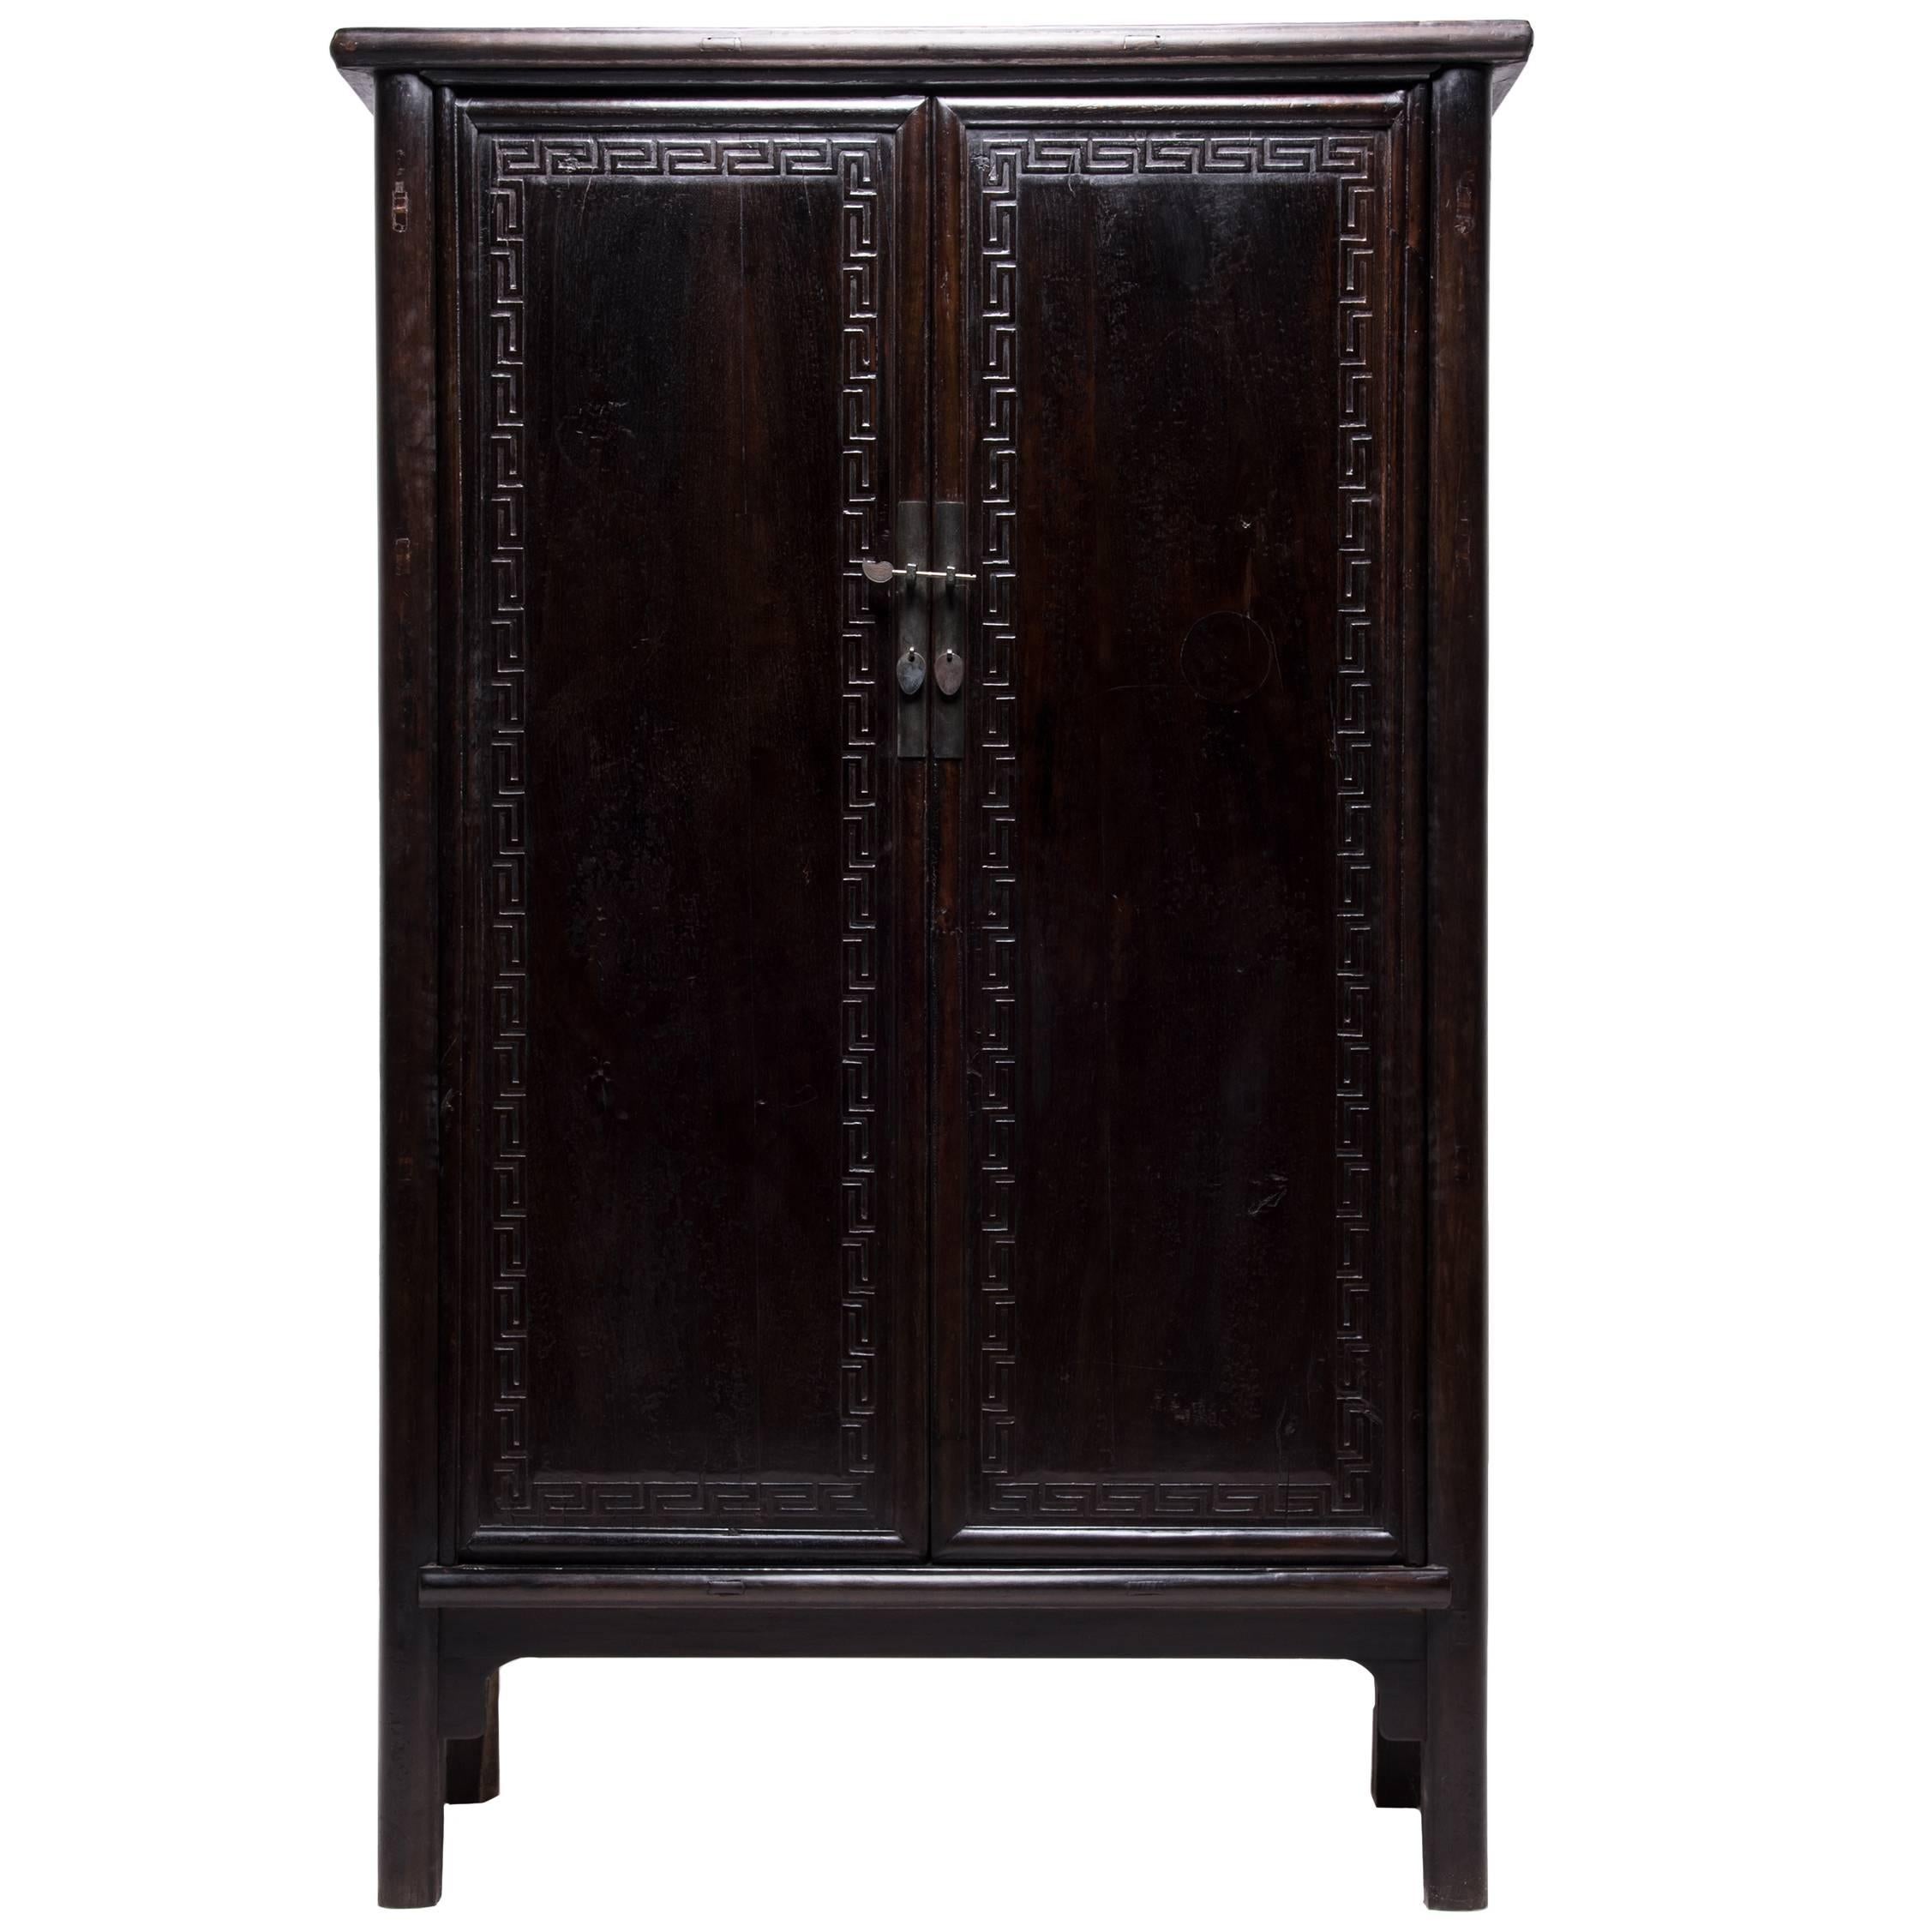 Tall Chinese Lacquer Cabinet with Greek Key Trim, c. 1850